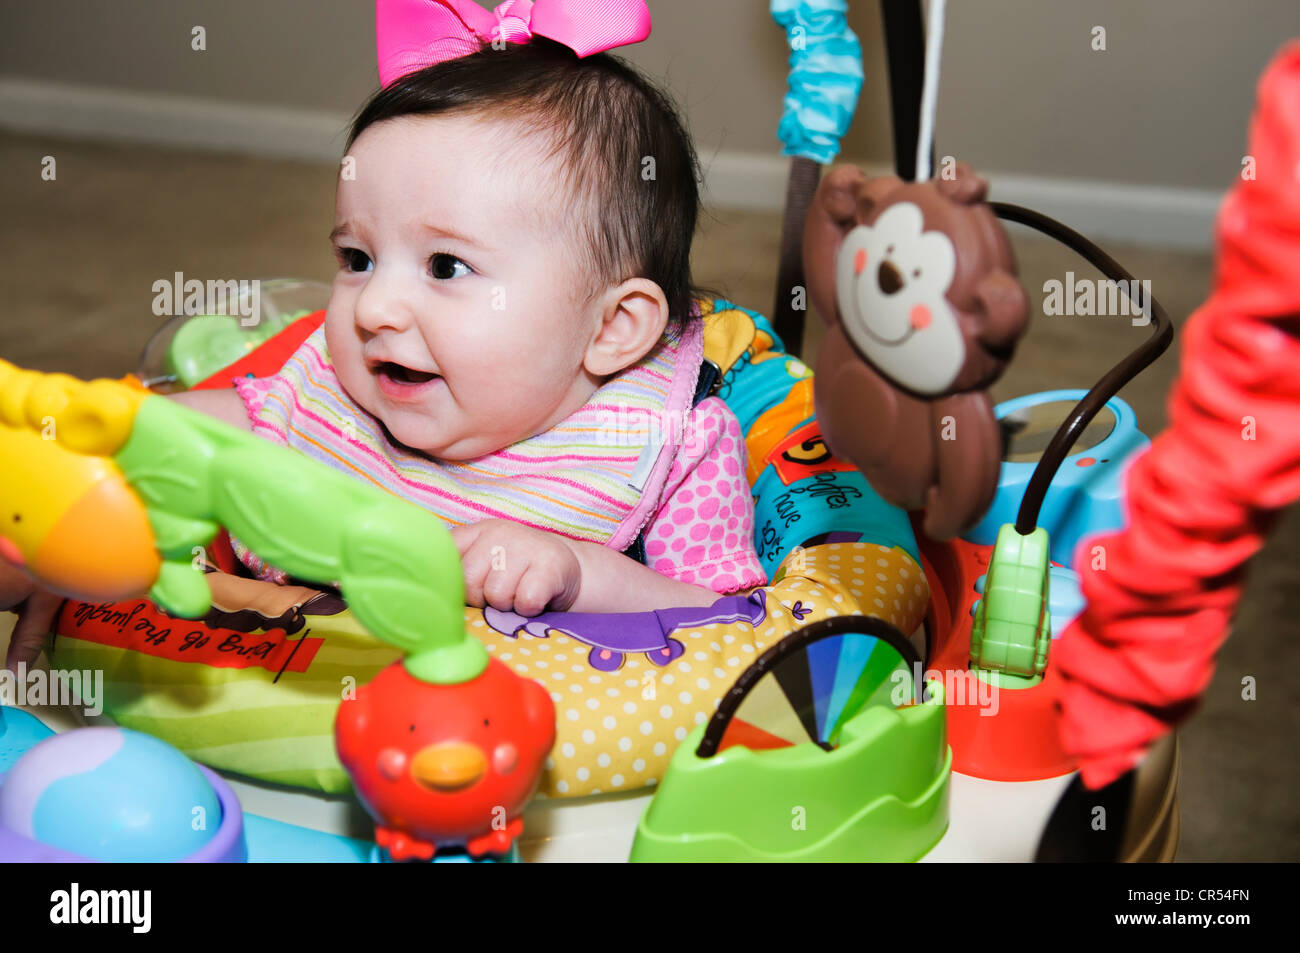 Adorable baby girl is entertained while playing in her padded educational jumper seat surrounded by interactive toys. Stock Photo